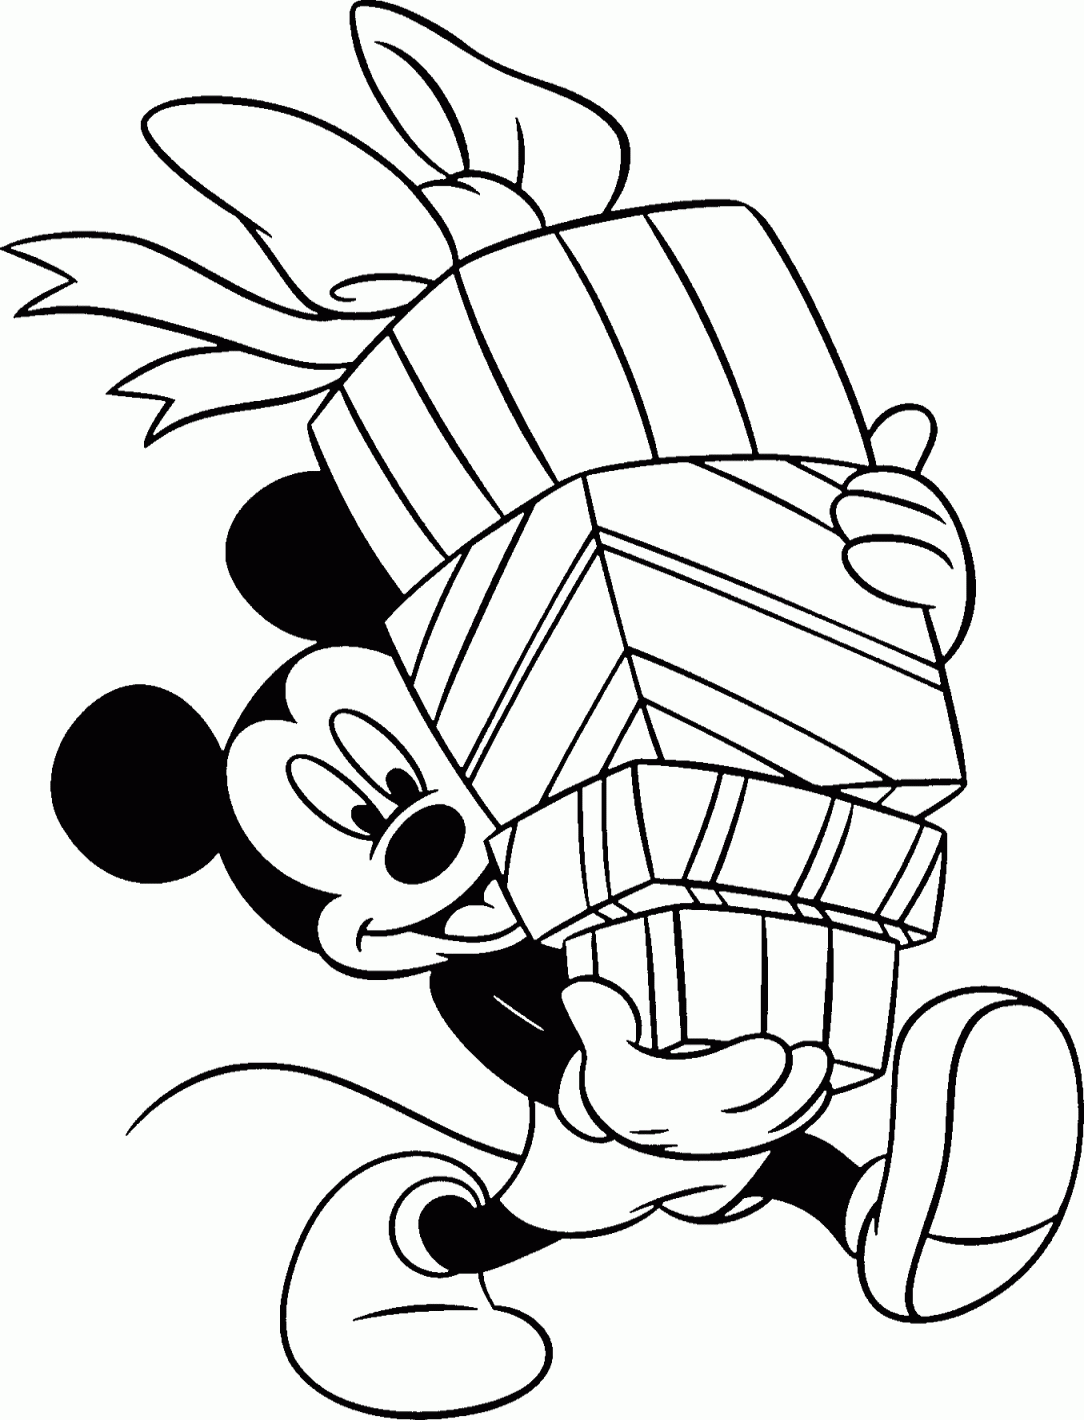 Mickey Mouse Birthday - Coloring Pages for Kids and for Adults